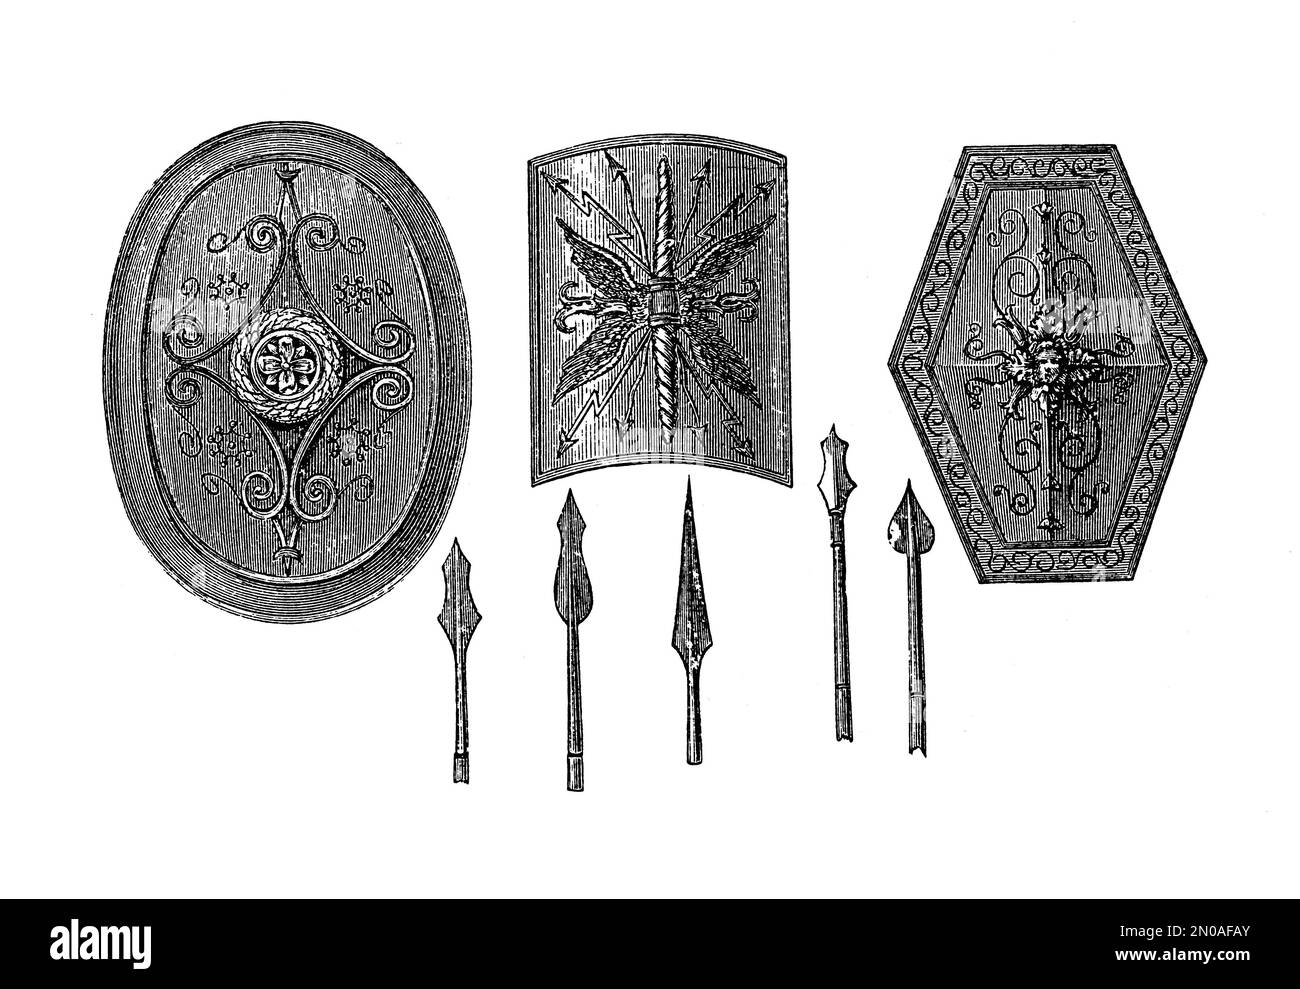 19th-century illustration of shields and lances from Ancient Rome ...